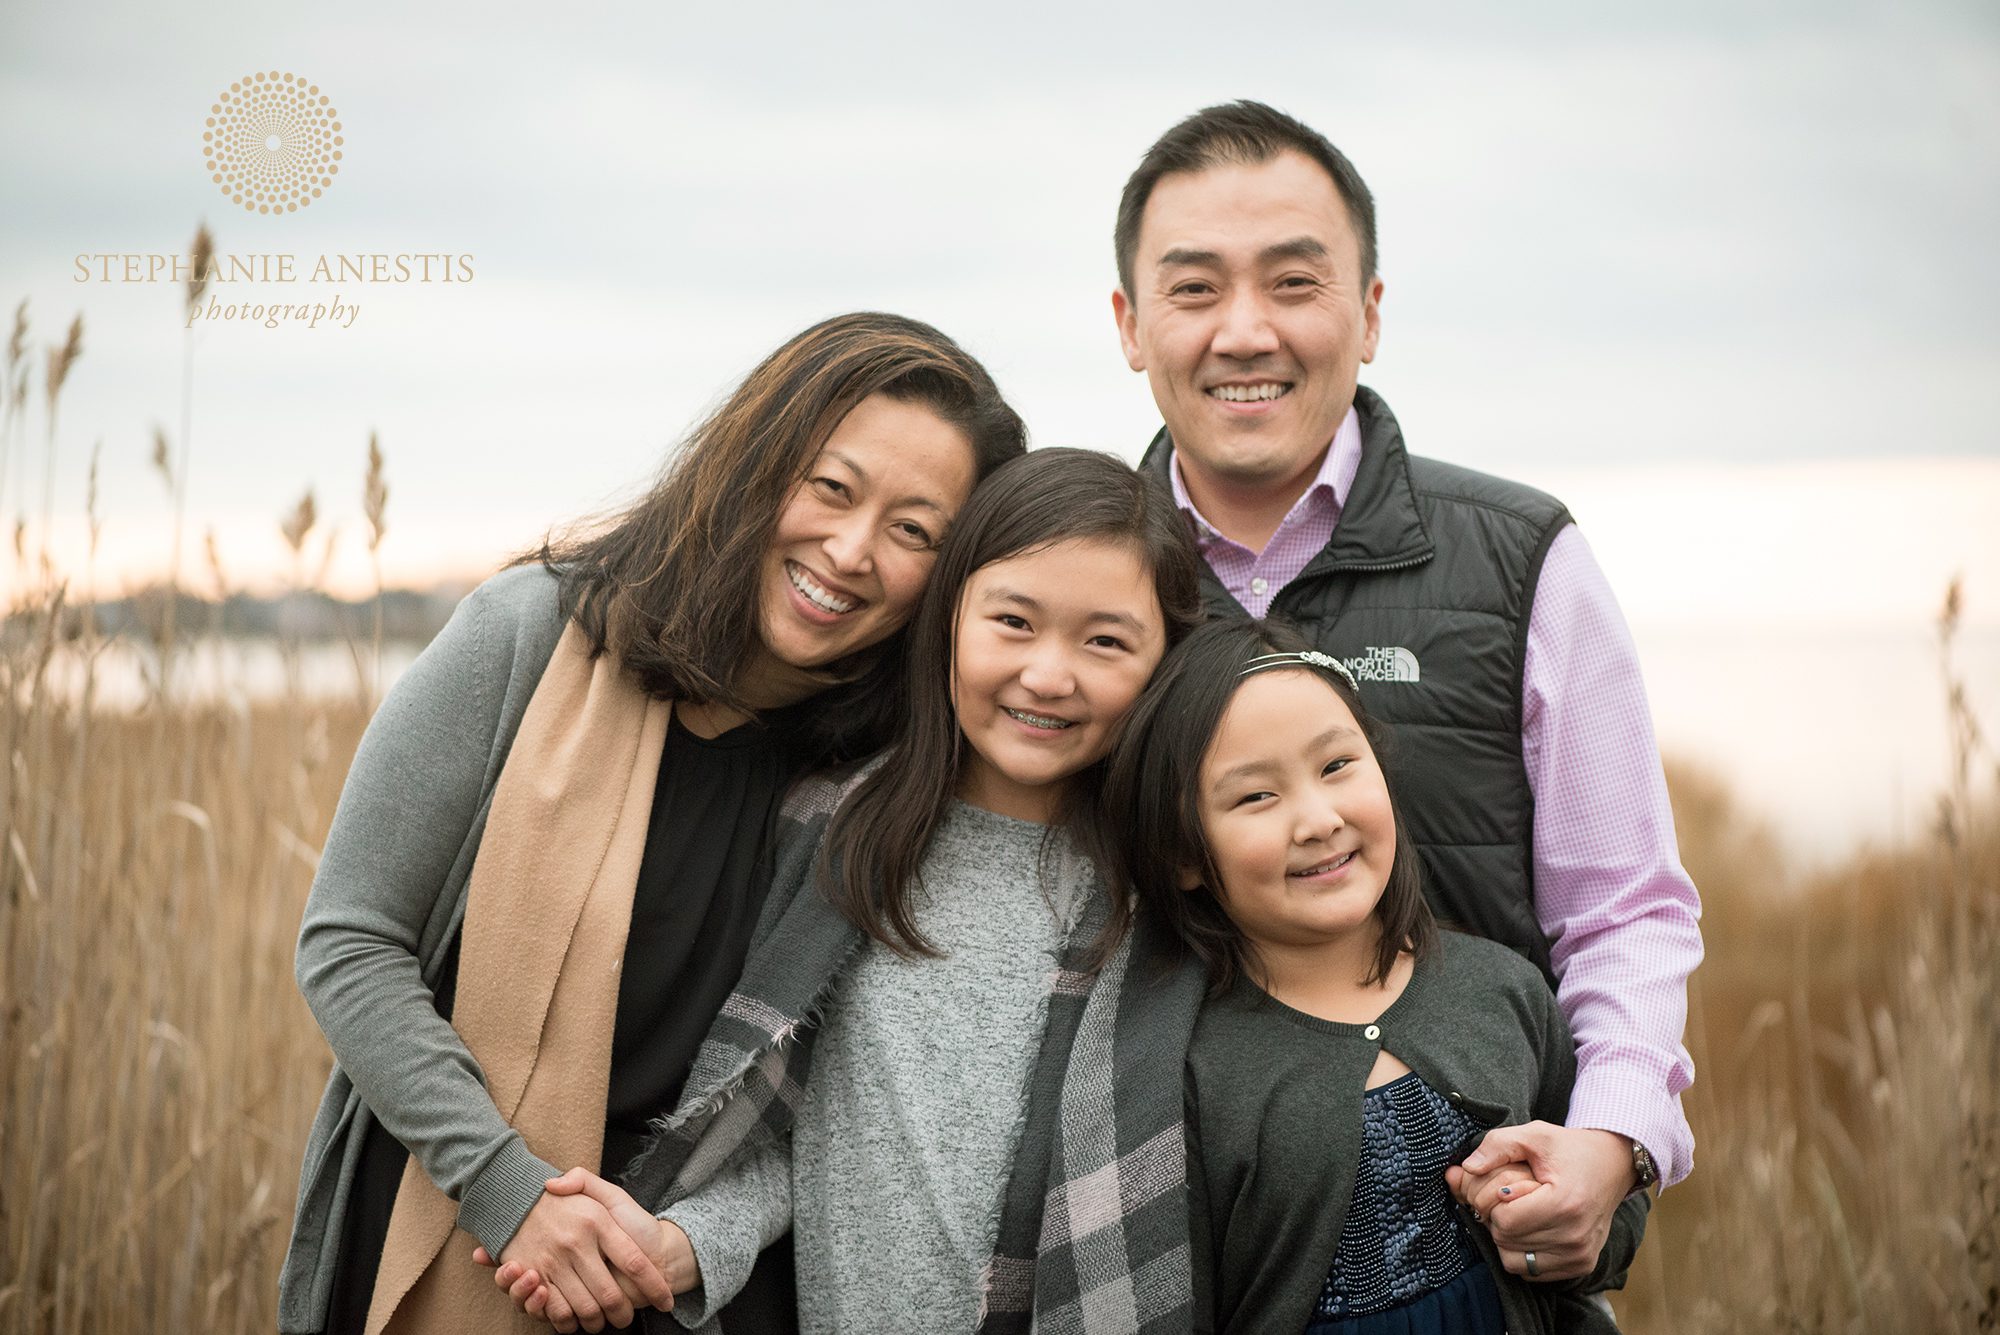 What to wear for fall family photos: neutrals with pop of pink